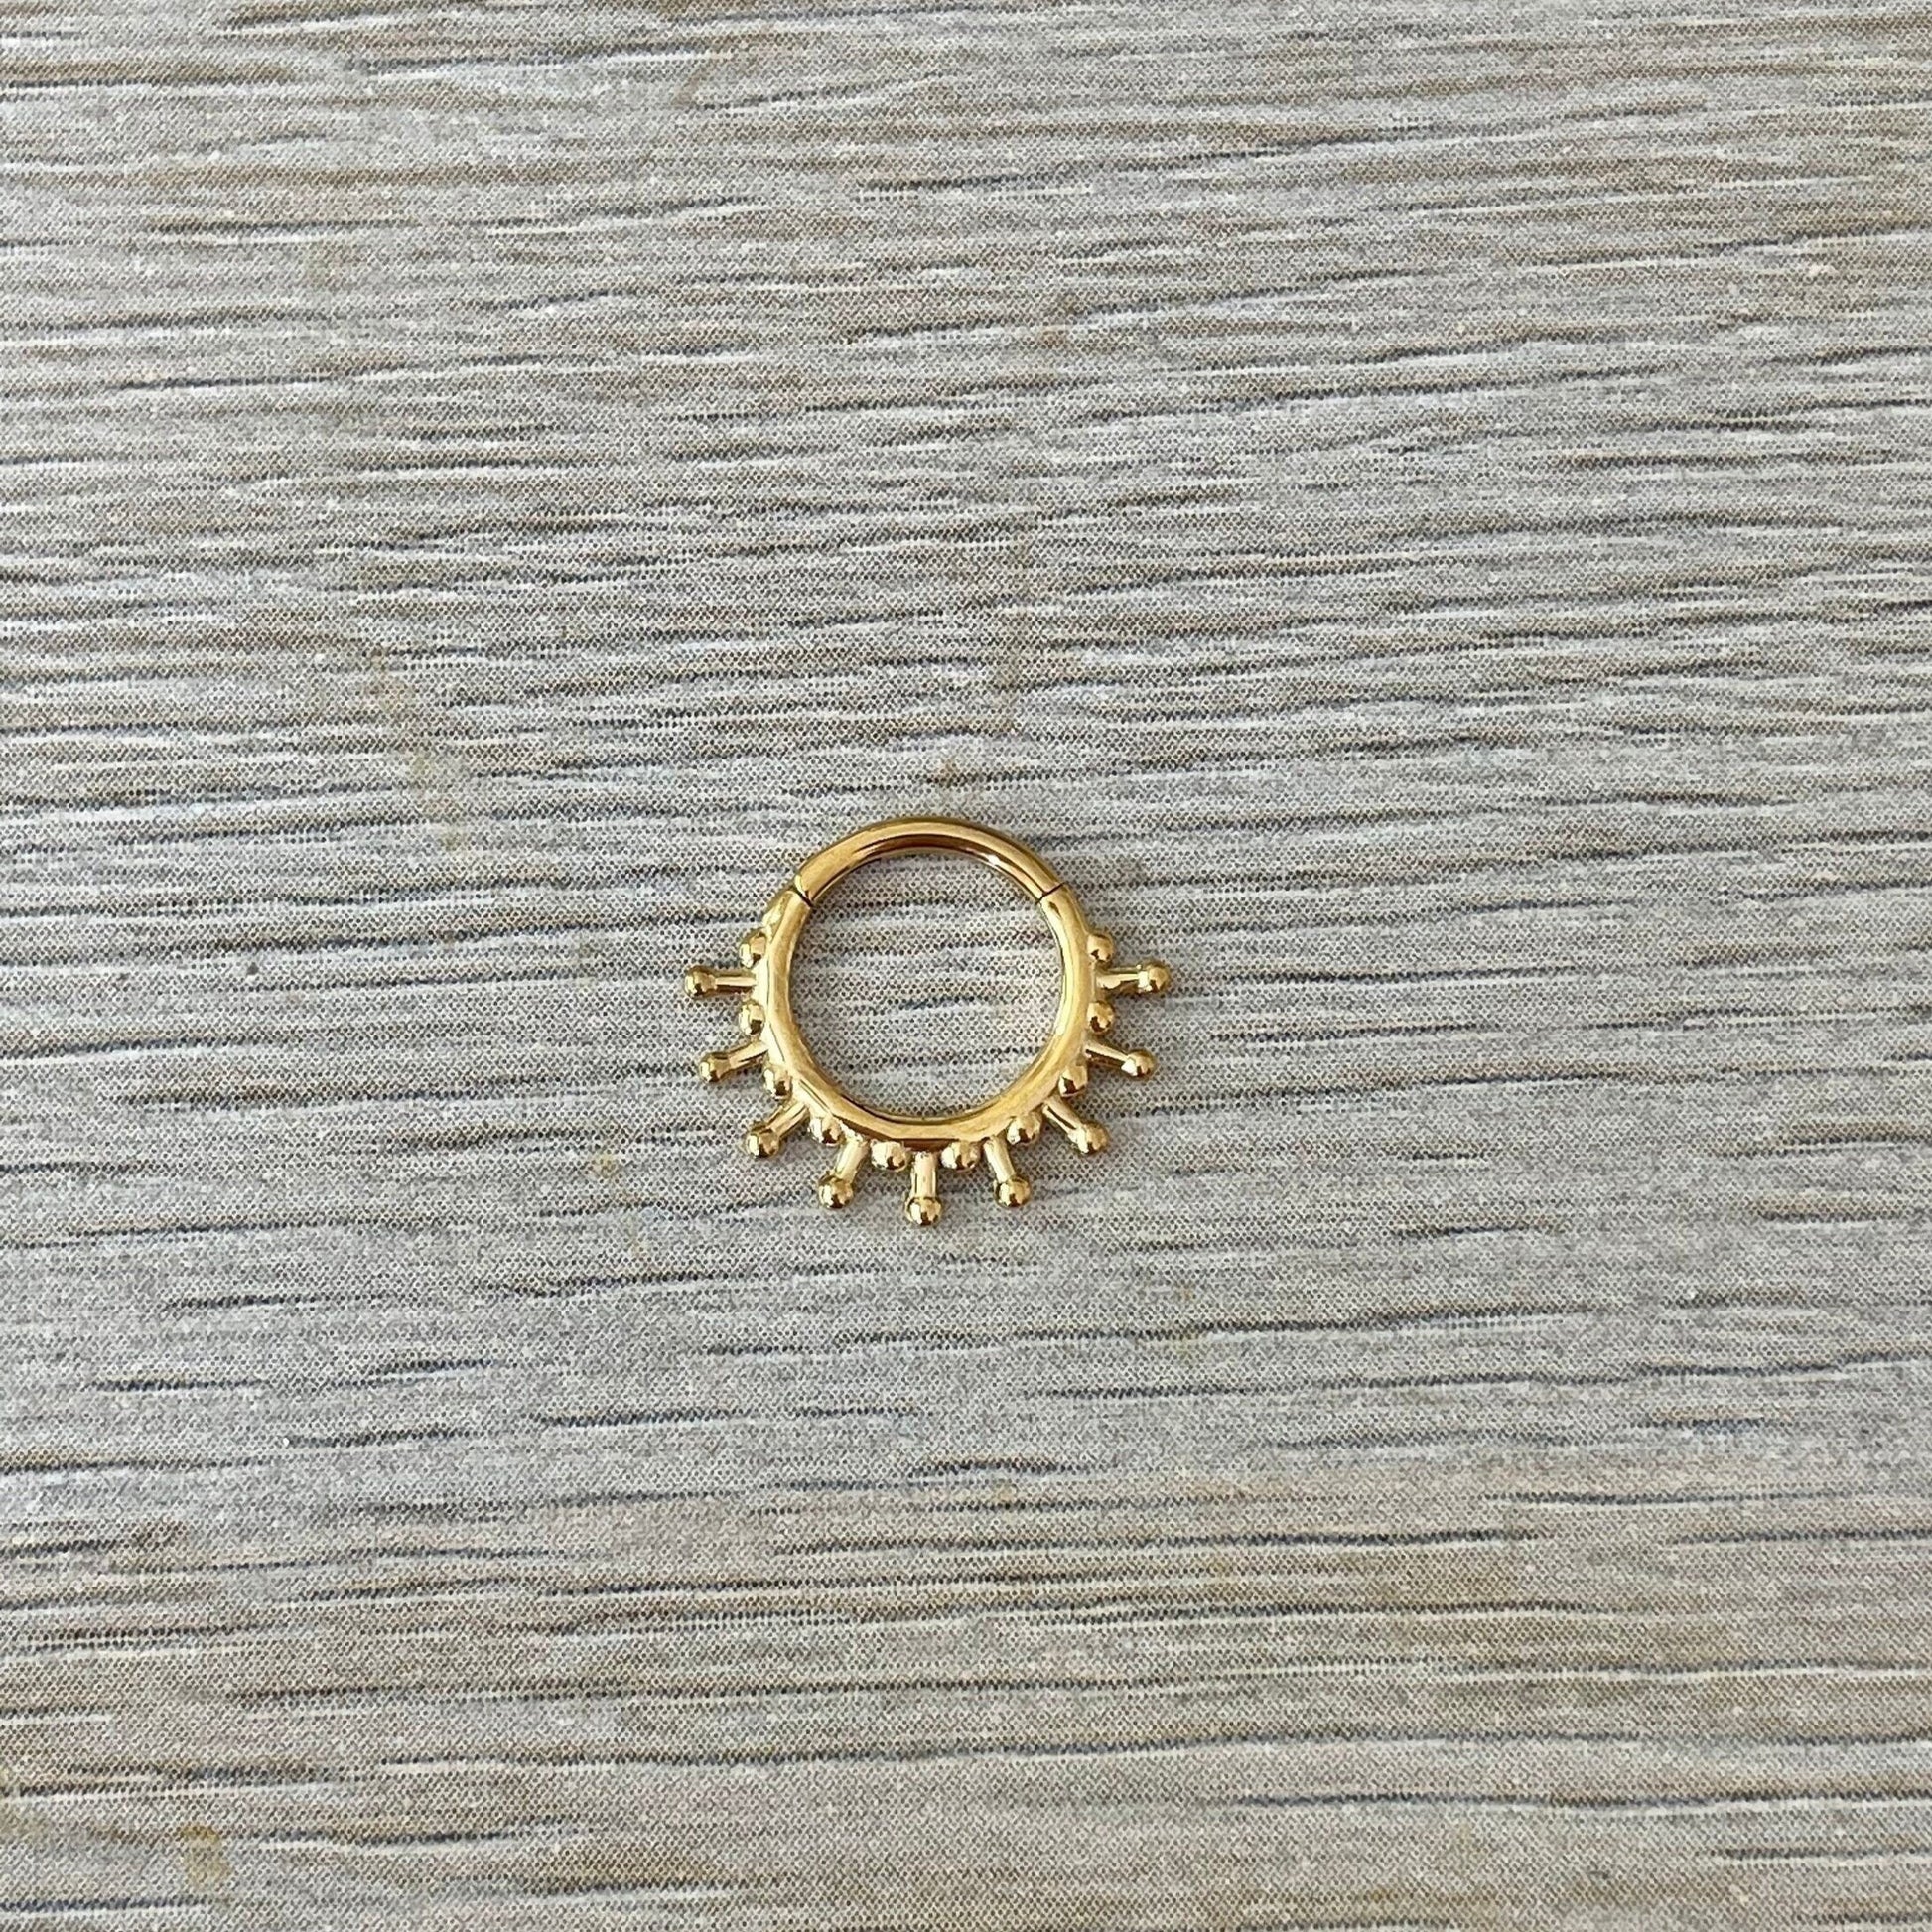 Gold Sunburst Daith Earring (16G | 8mm or 10mm | Surgical Steel | Gold, Silver, or Black)